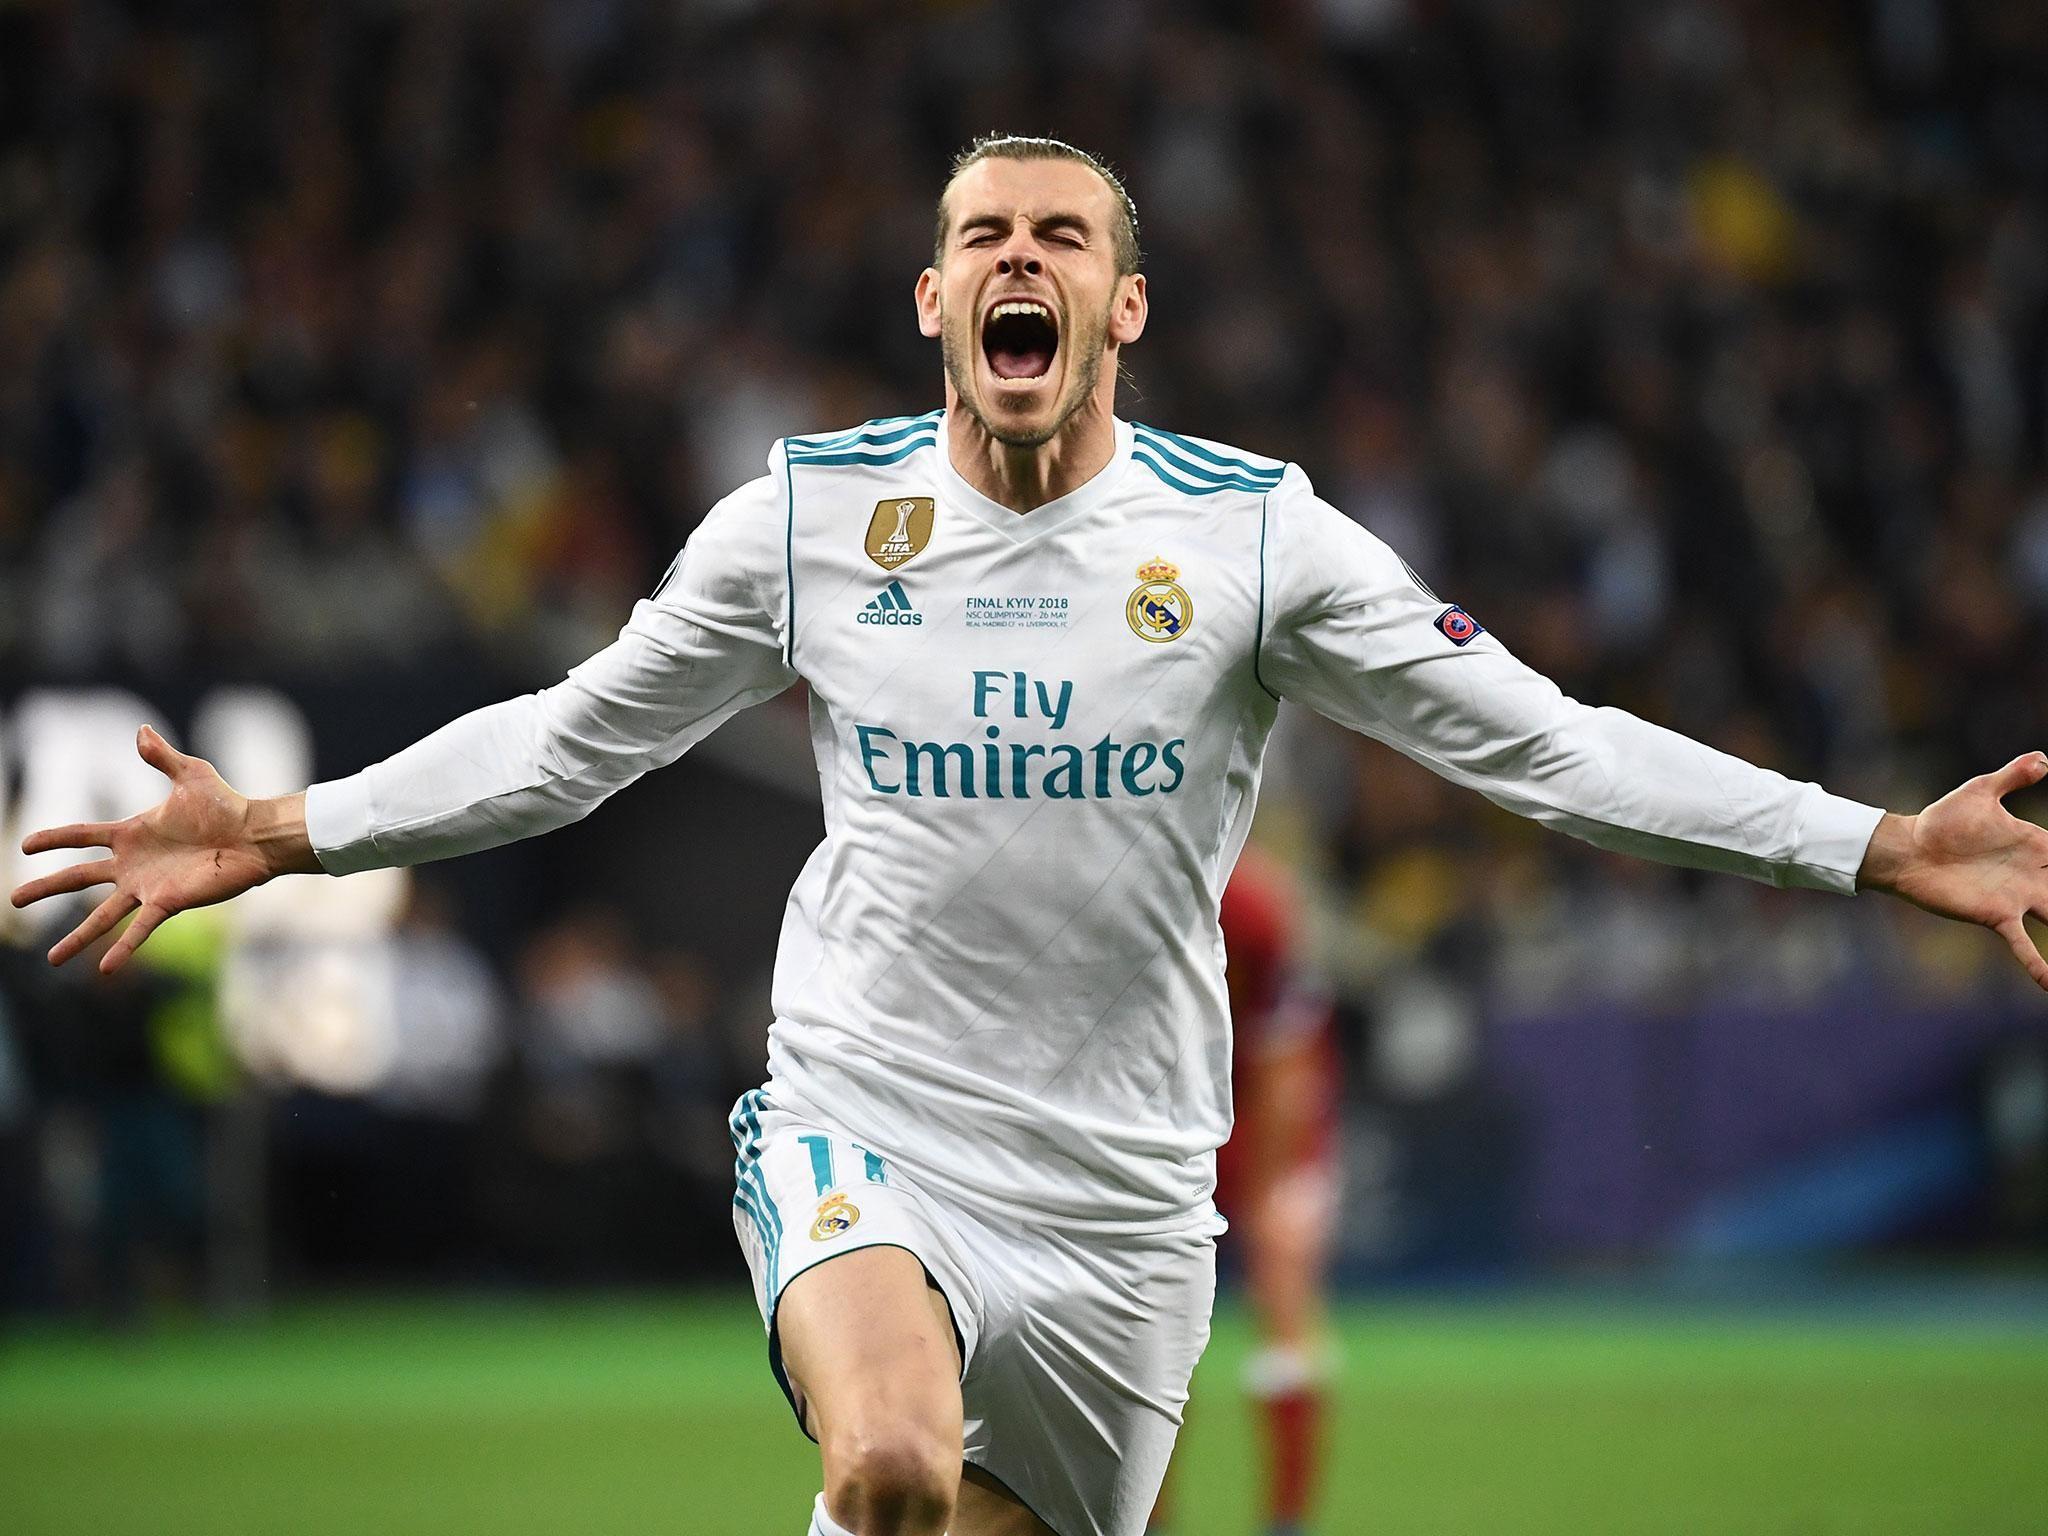 Gareth Bale transfer: Tottenham could beat Manchester United to